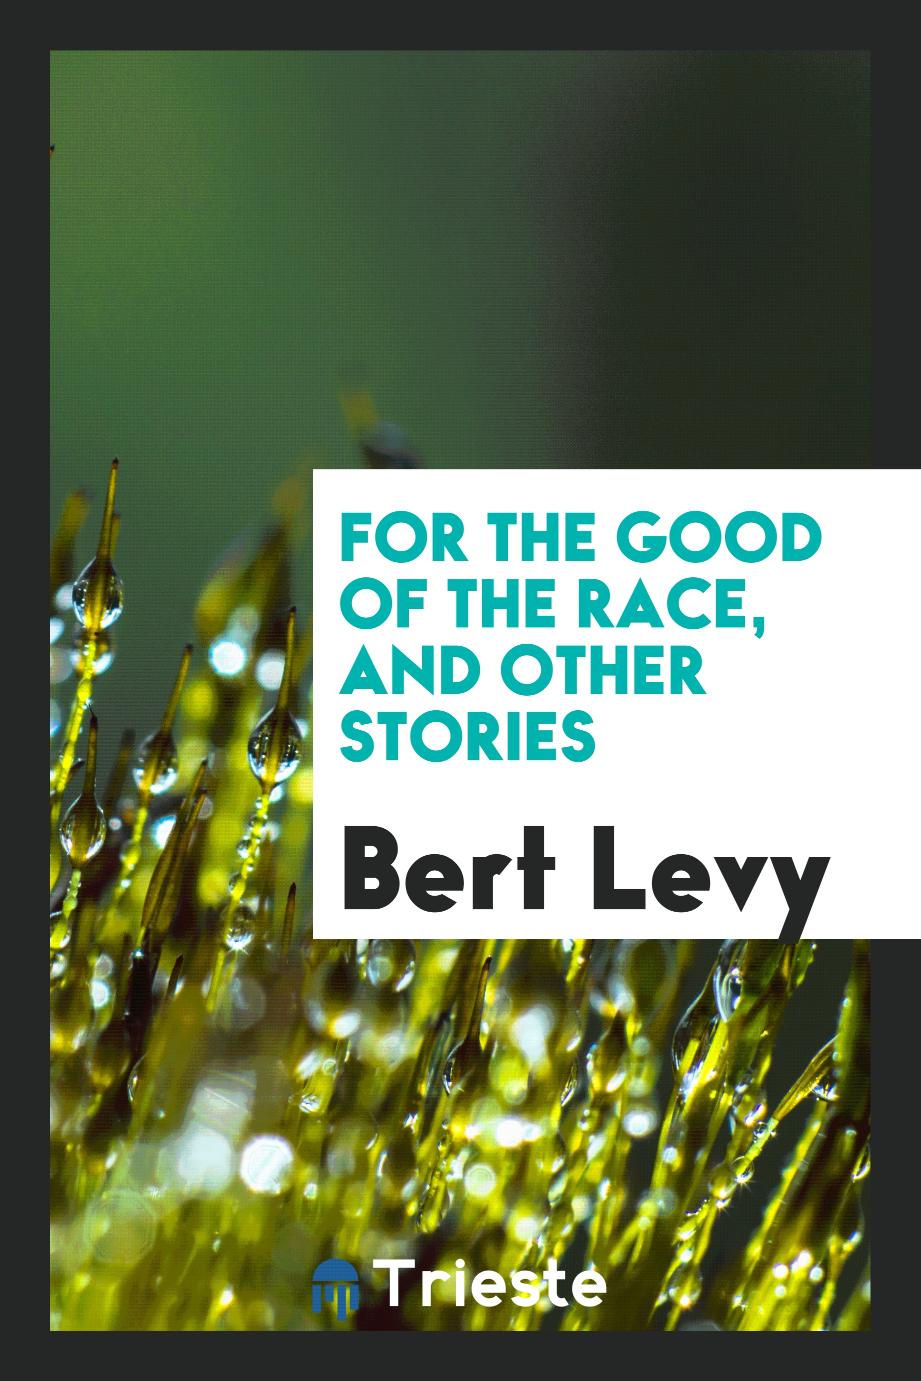 Bert Levy - For the good of the race, and other stories